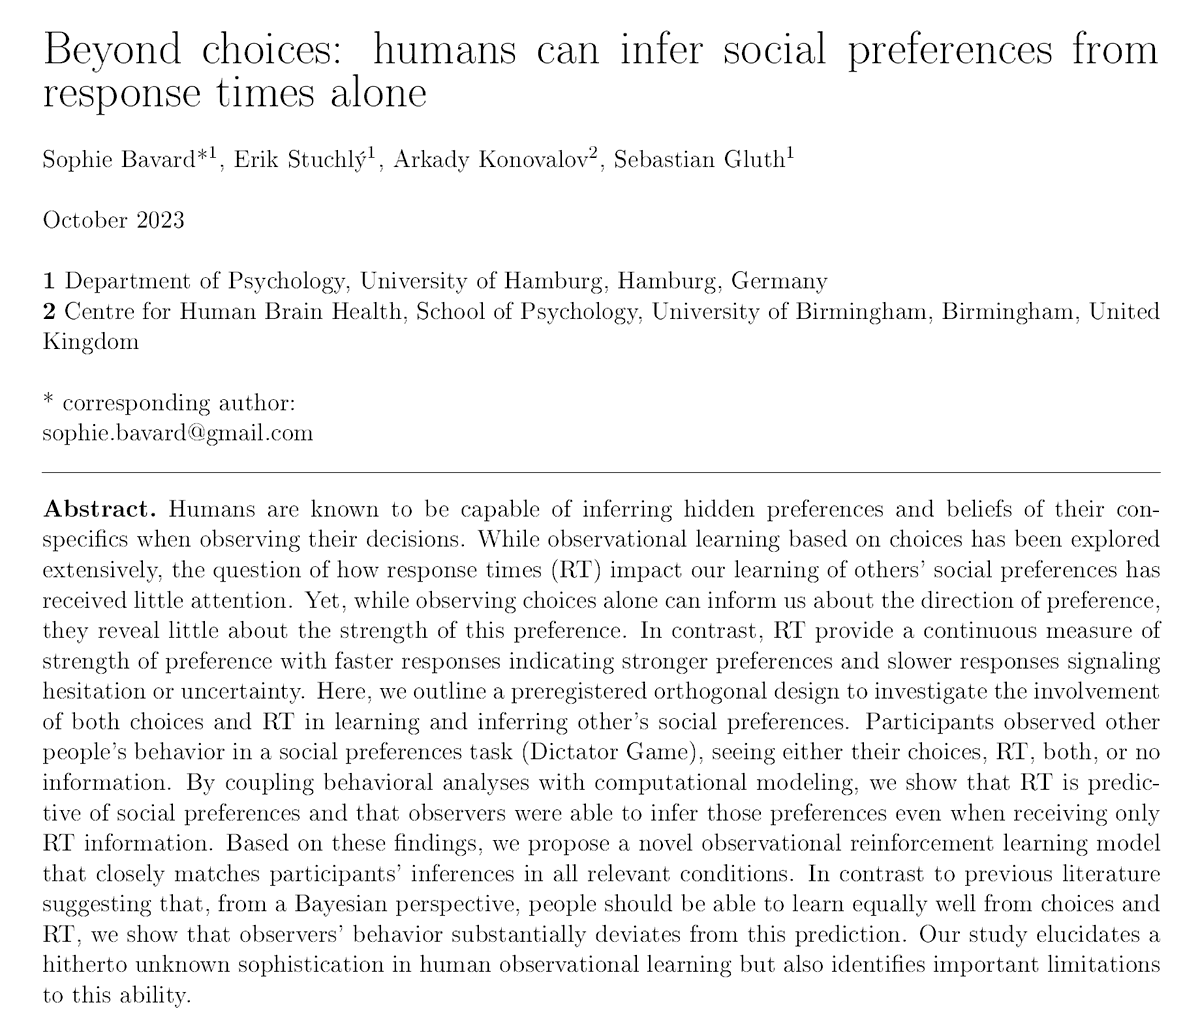 🚀 Fresh Preprint Alert! 🚀 We (w/ @ErikStuchly, @arkadykonovalov & @SebastianGluth) are thrilled to share our work on the impact of response times (RT) on learning others' social preference 👥 main results below, but check out our preprint! 👇 psyarxiv.com/38yrw